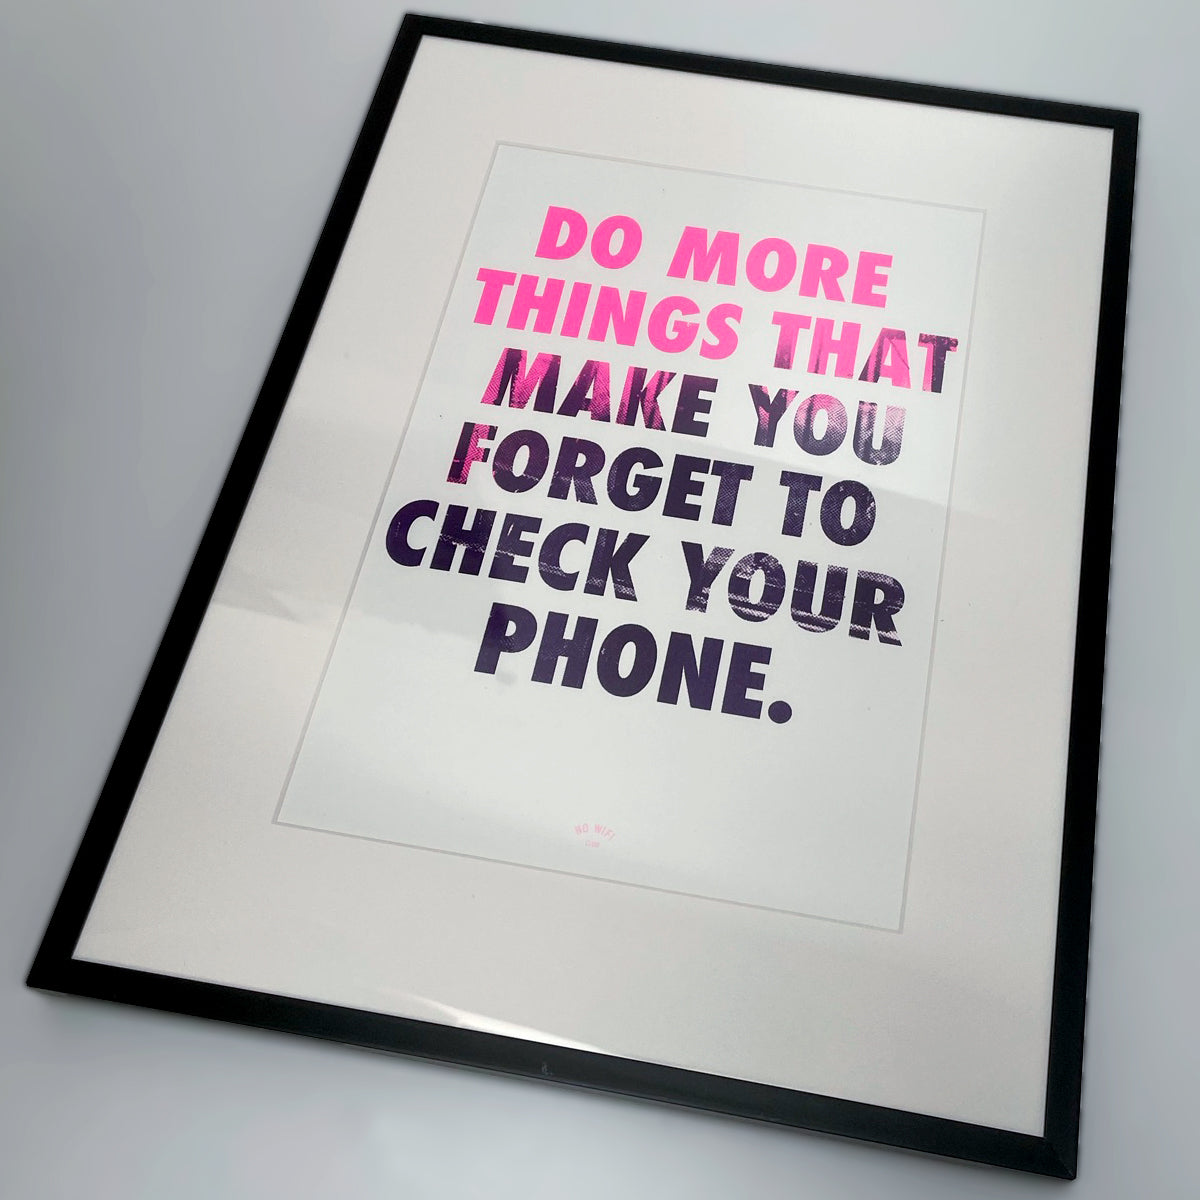 Do more things that make you forget to check your phone